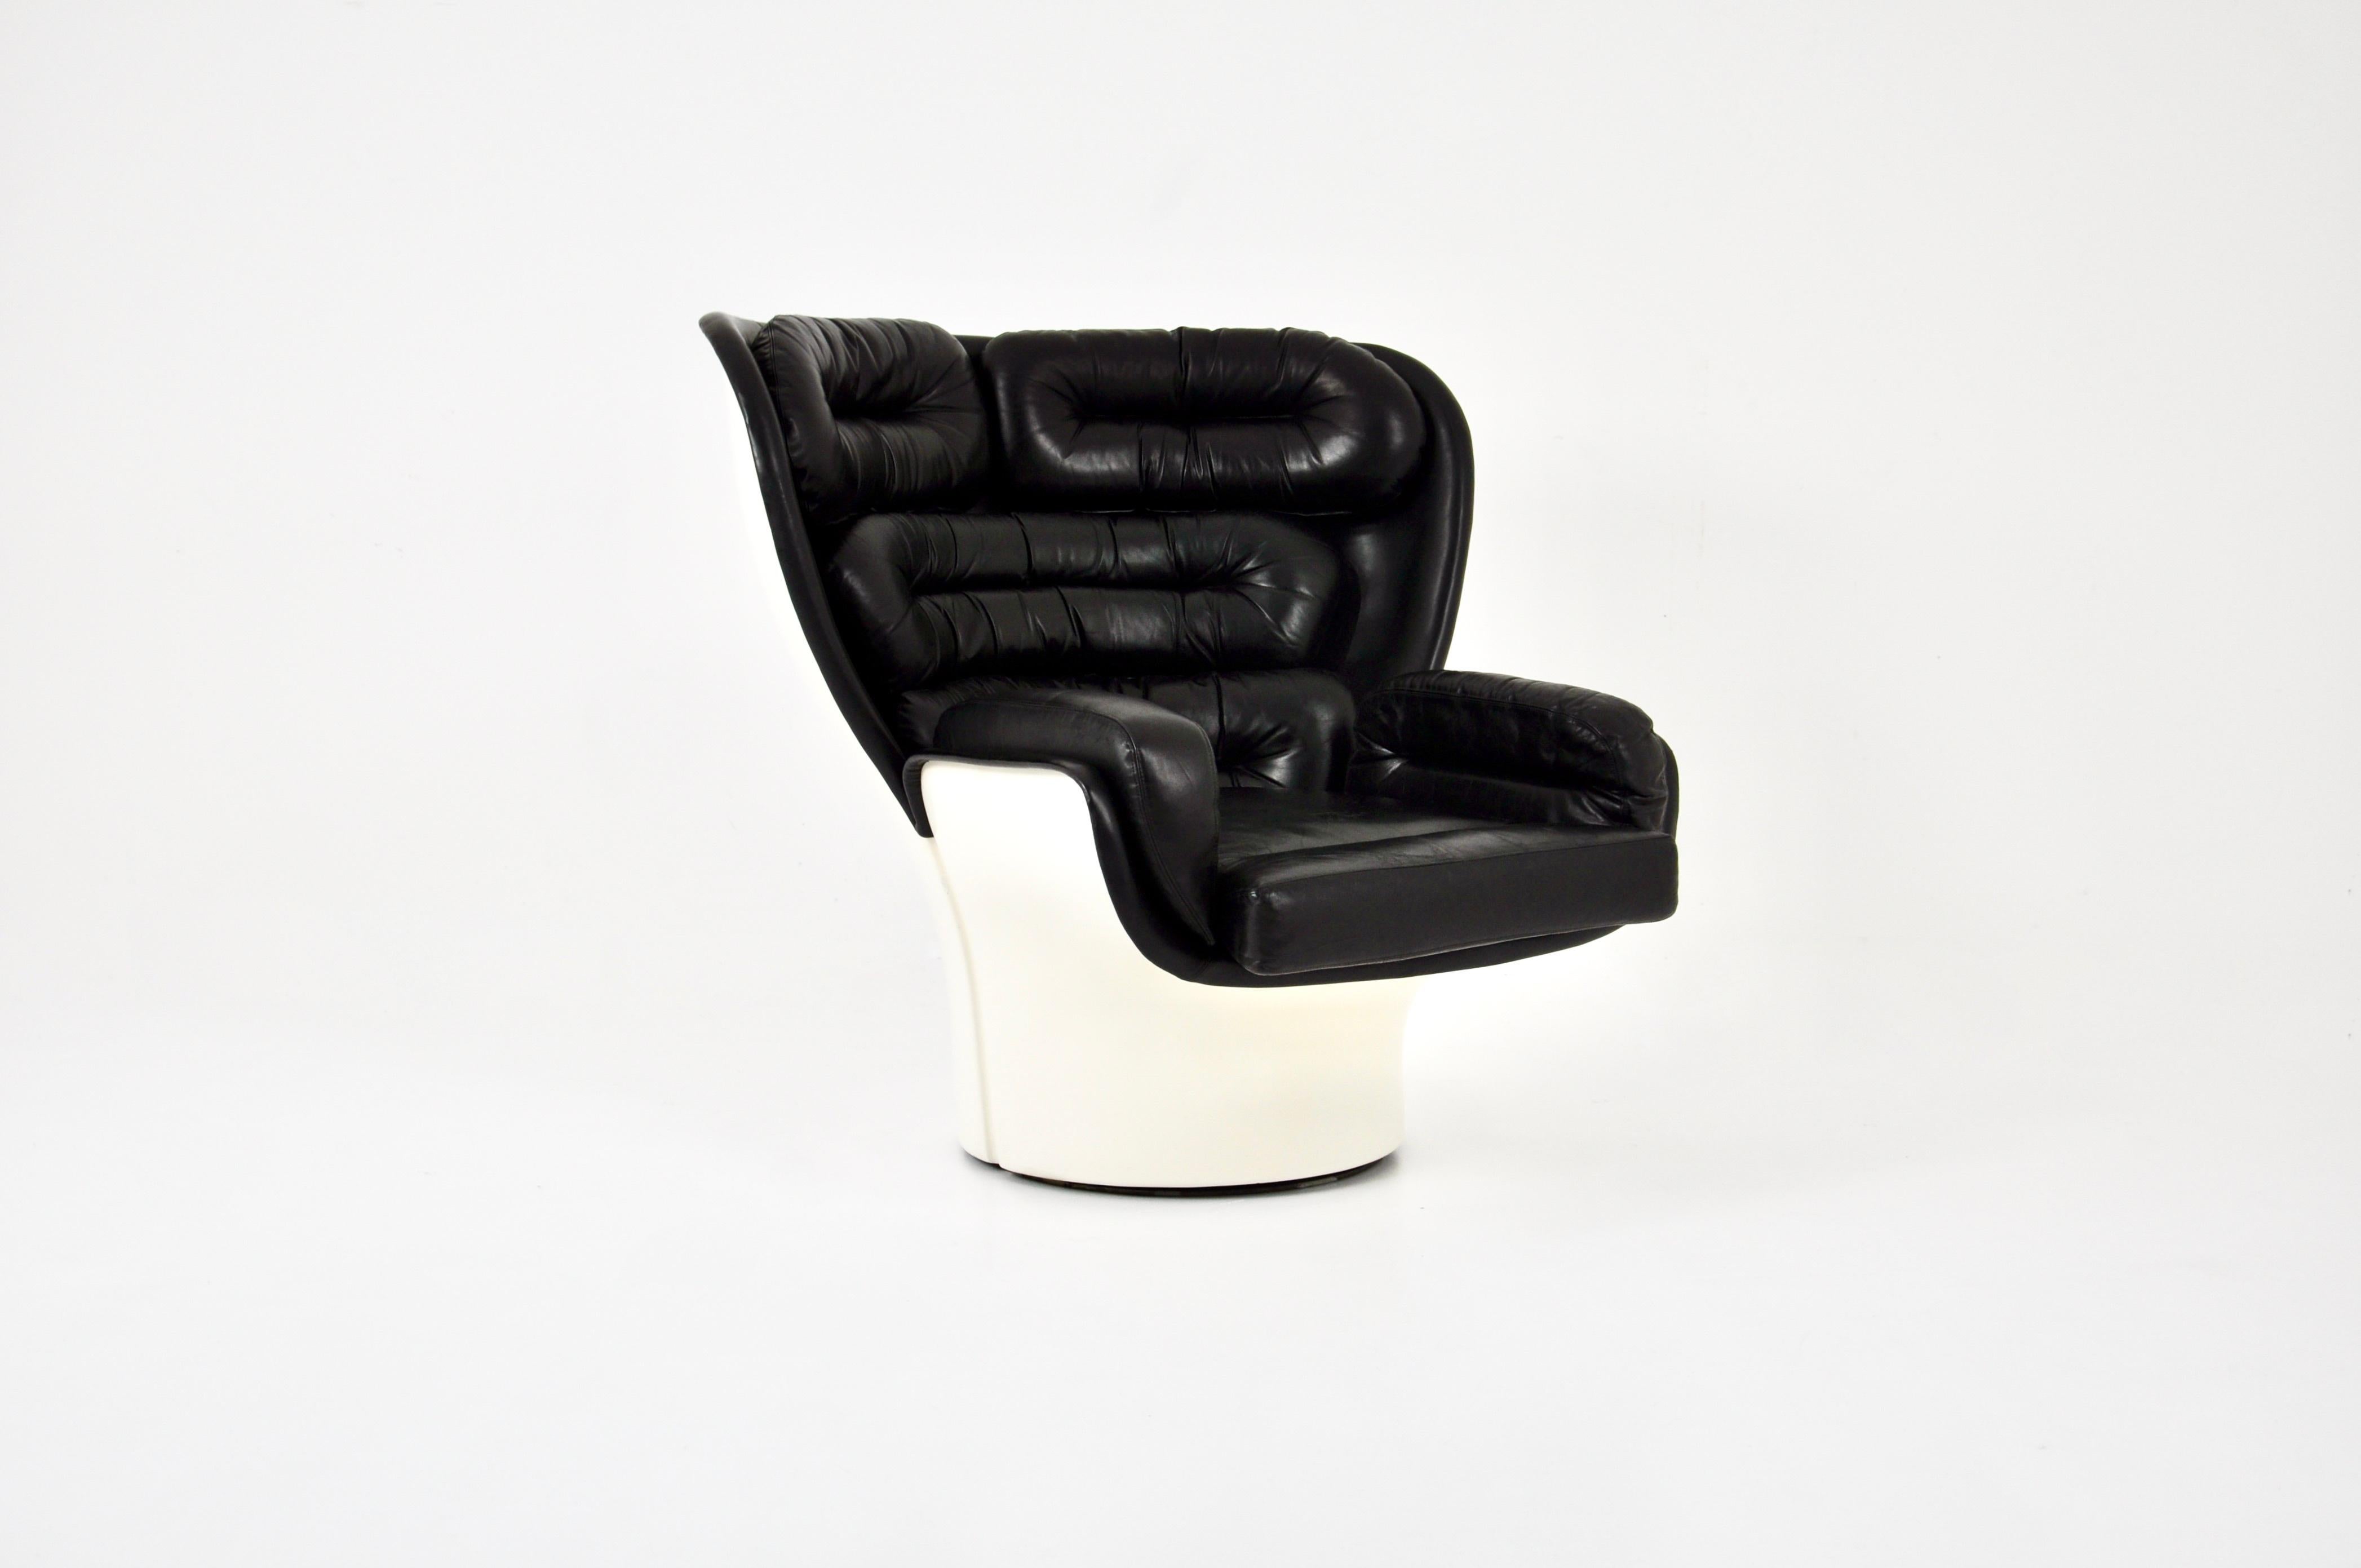 Swivel armchair in black leather and white shell by Joe Colombo. Elda model. Seat height 39cm. Wear due to time and age.